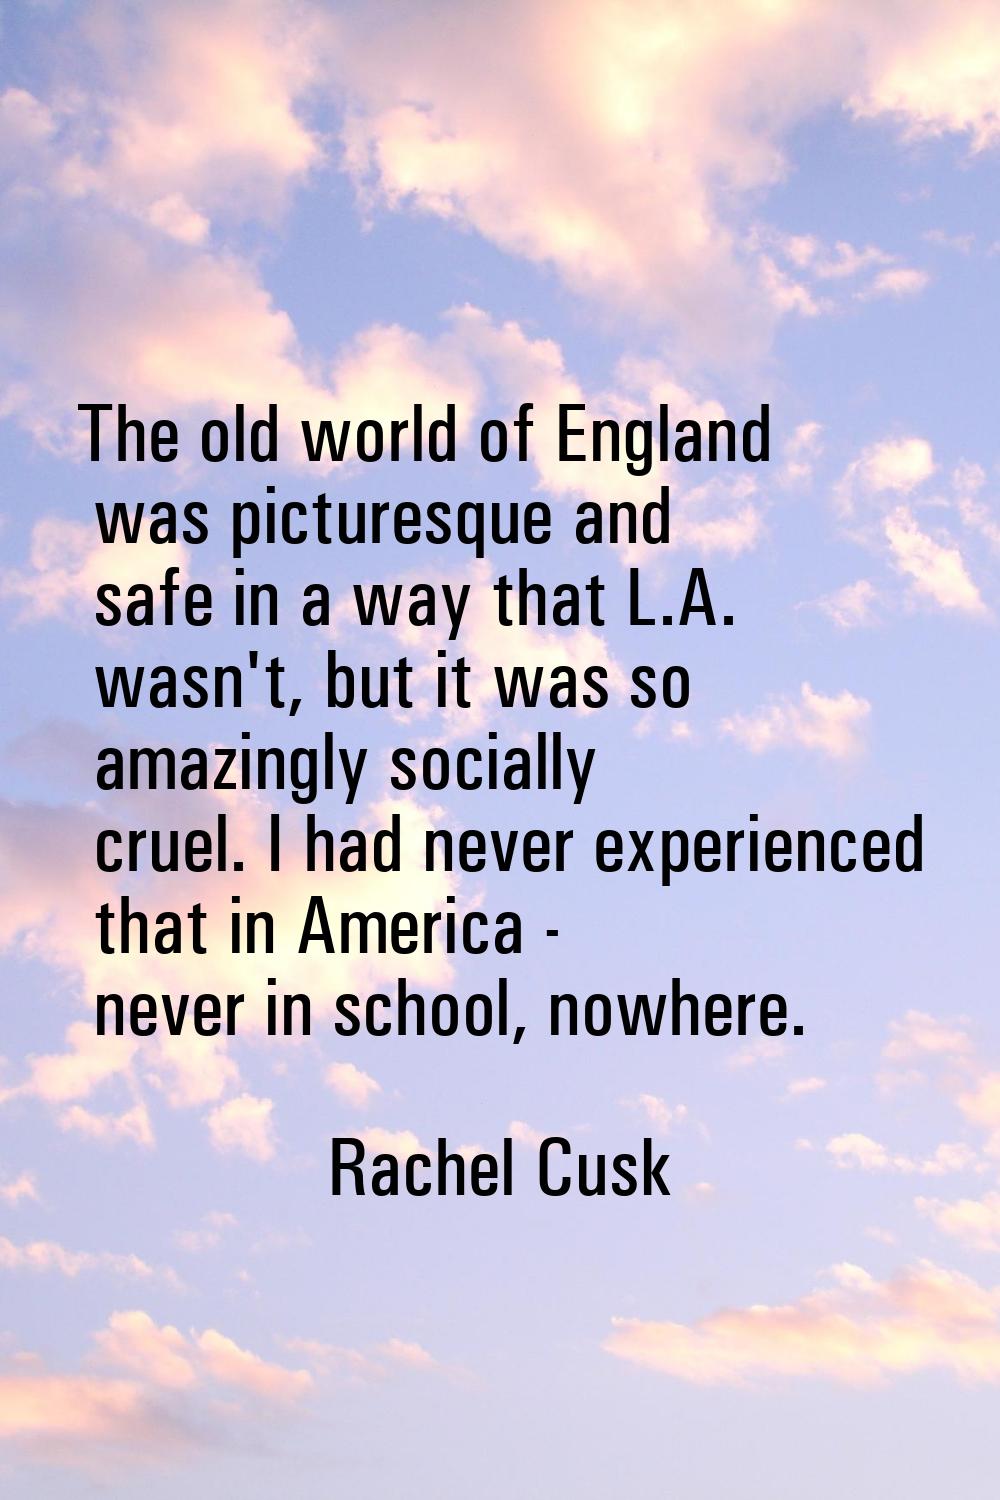 The old world of England was picturesque and safe in a way that L.A. wasn't, but it was so amazingl